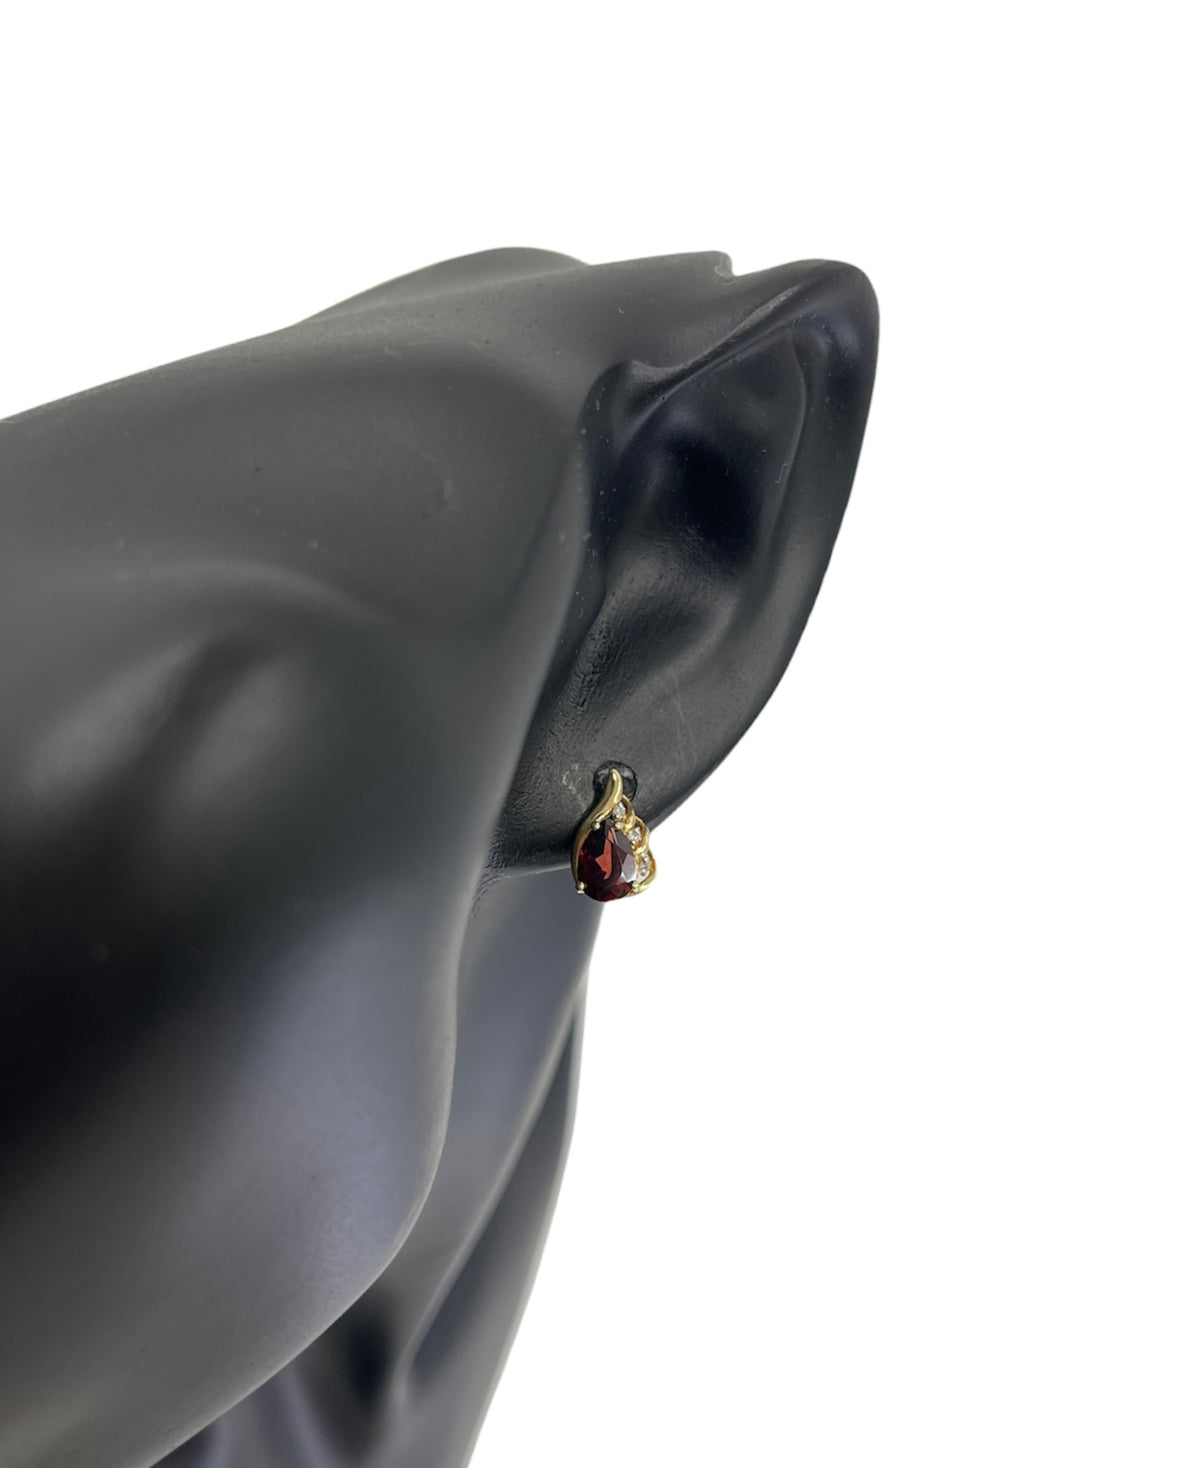 10K Yellow Gold 1.76cttw Genuine Garnet and 0.03cttw Diamond Stud Earrings with Butterfly Backs